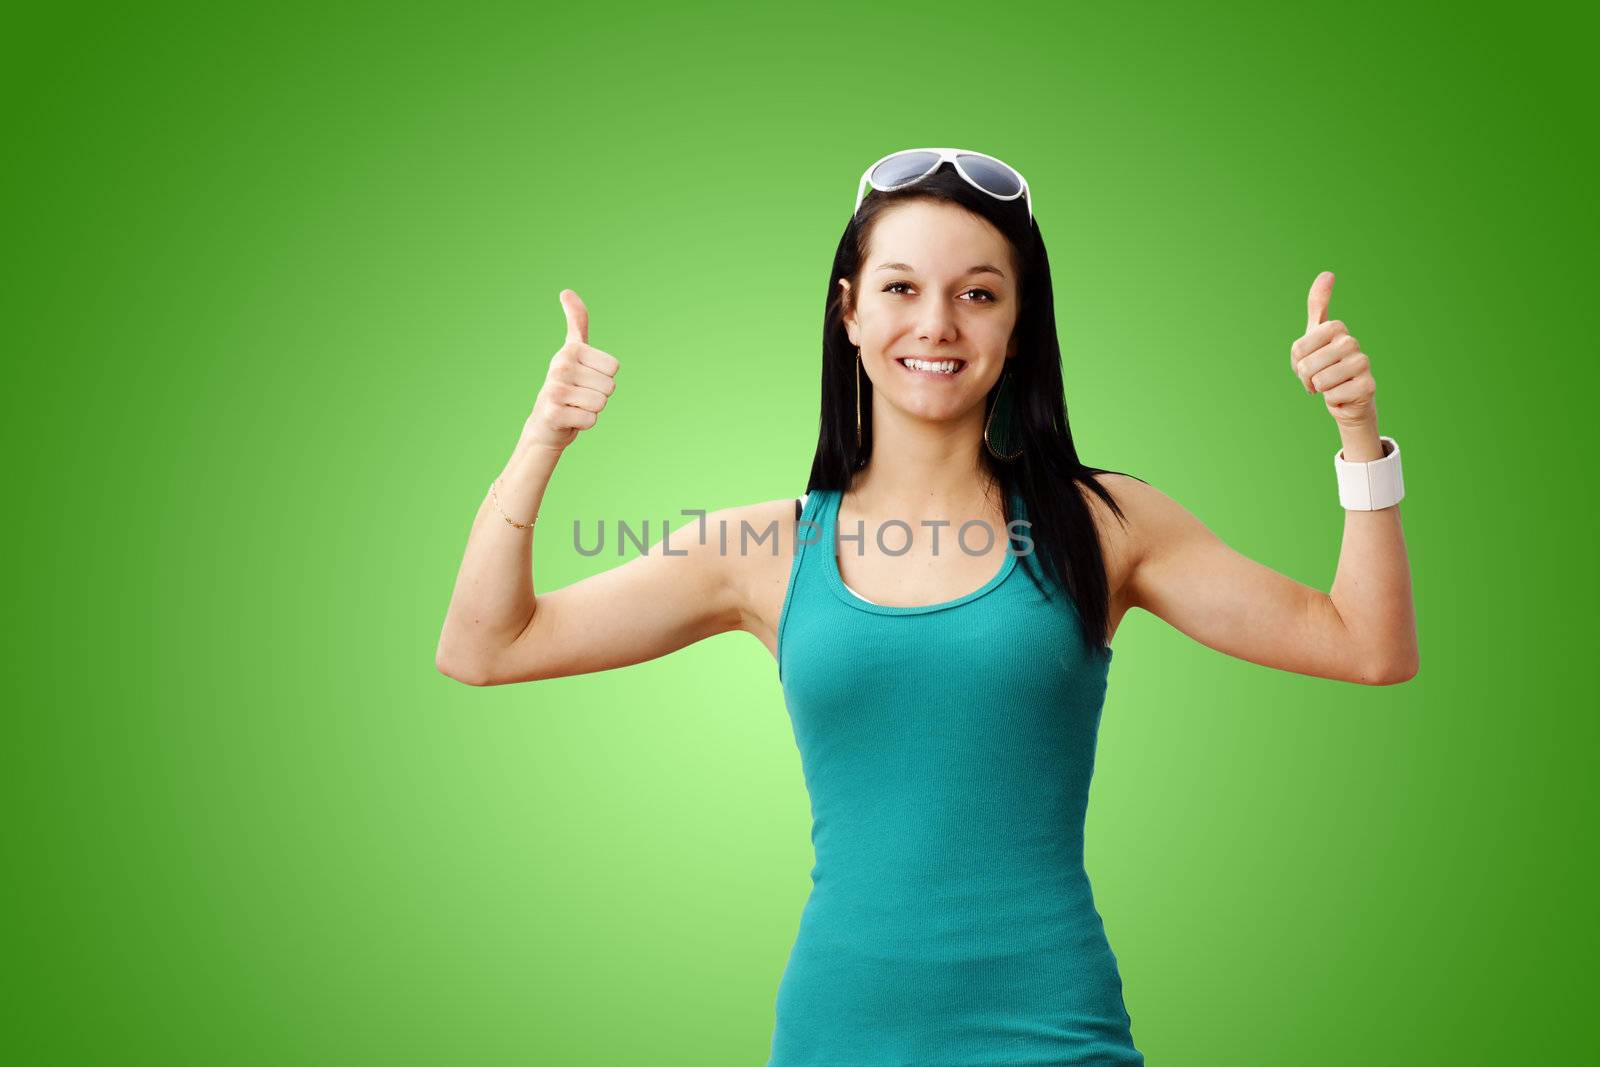 Pretty healthy and lean young woman smiling giving two thumbs up over gradient green background: perfect for weight loss or other achievement.